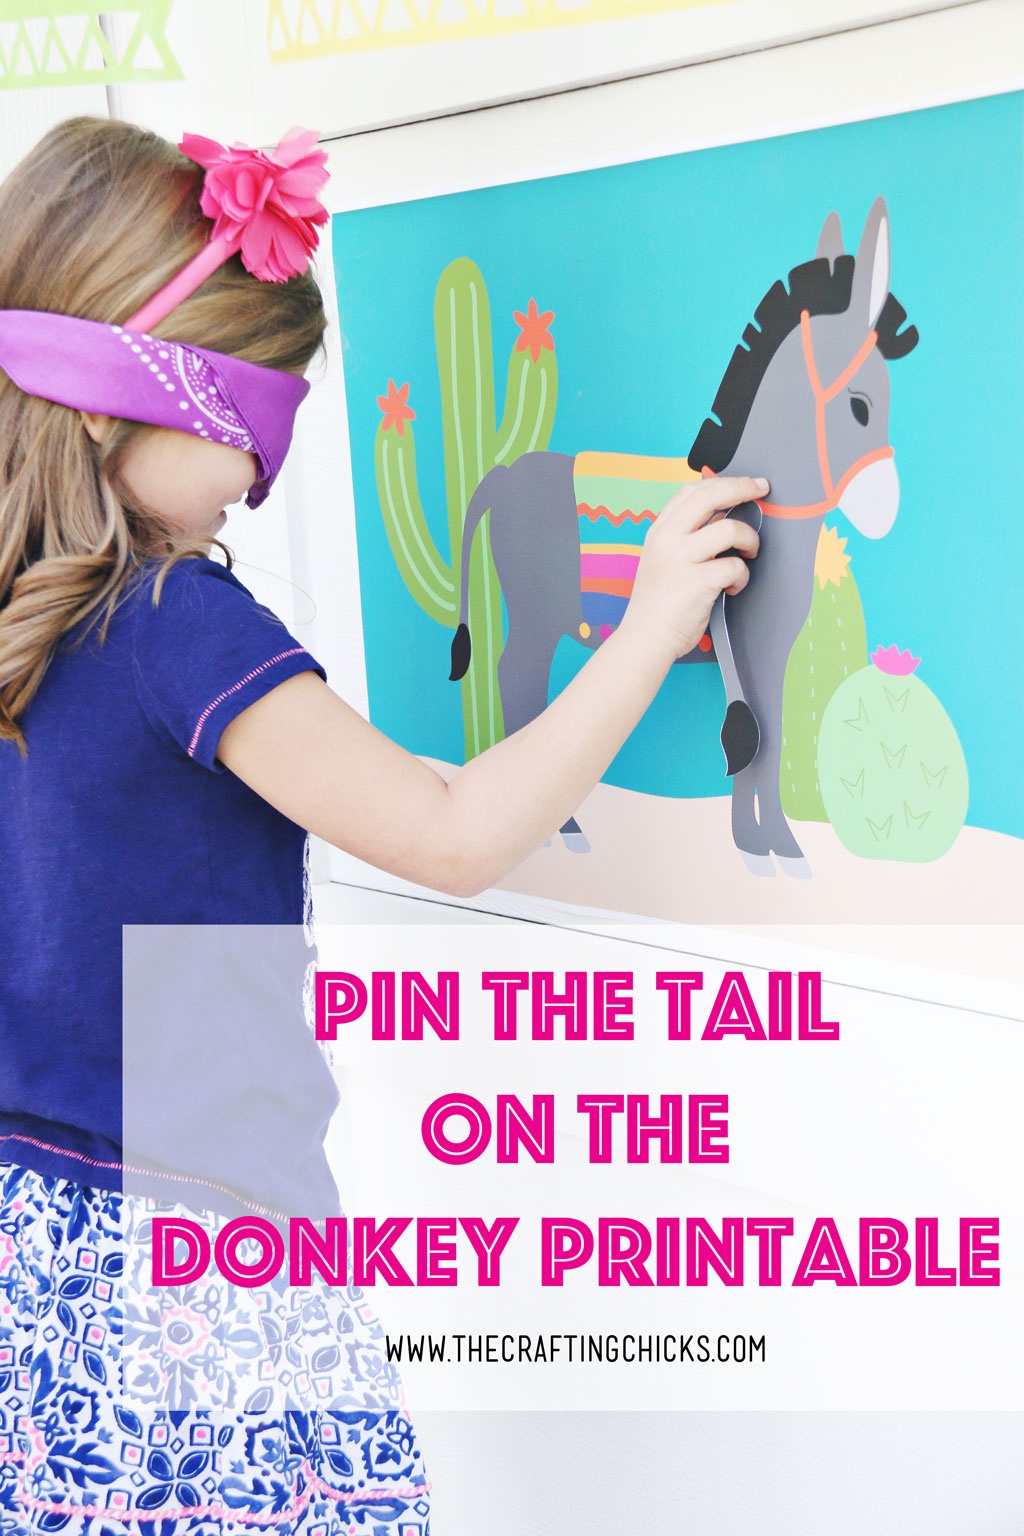 Pin The Tail On The Donkey - The Crafting Chicks - Free Printable Pin The Tail On The Cat